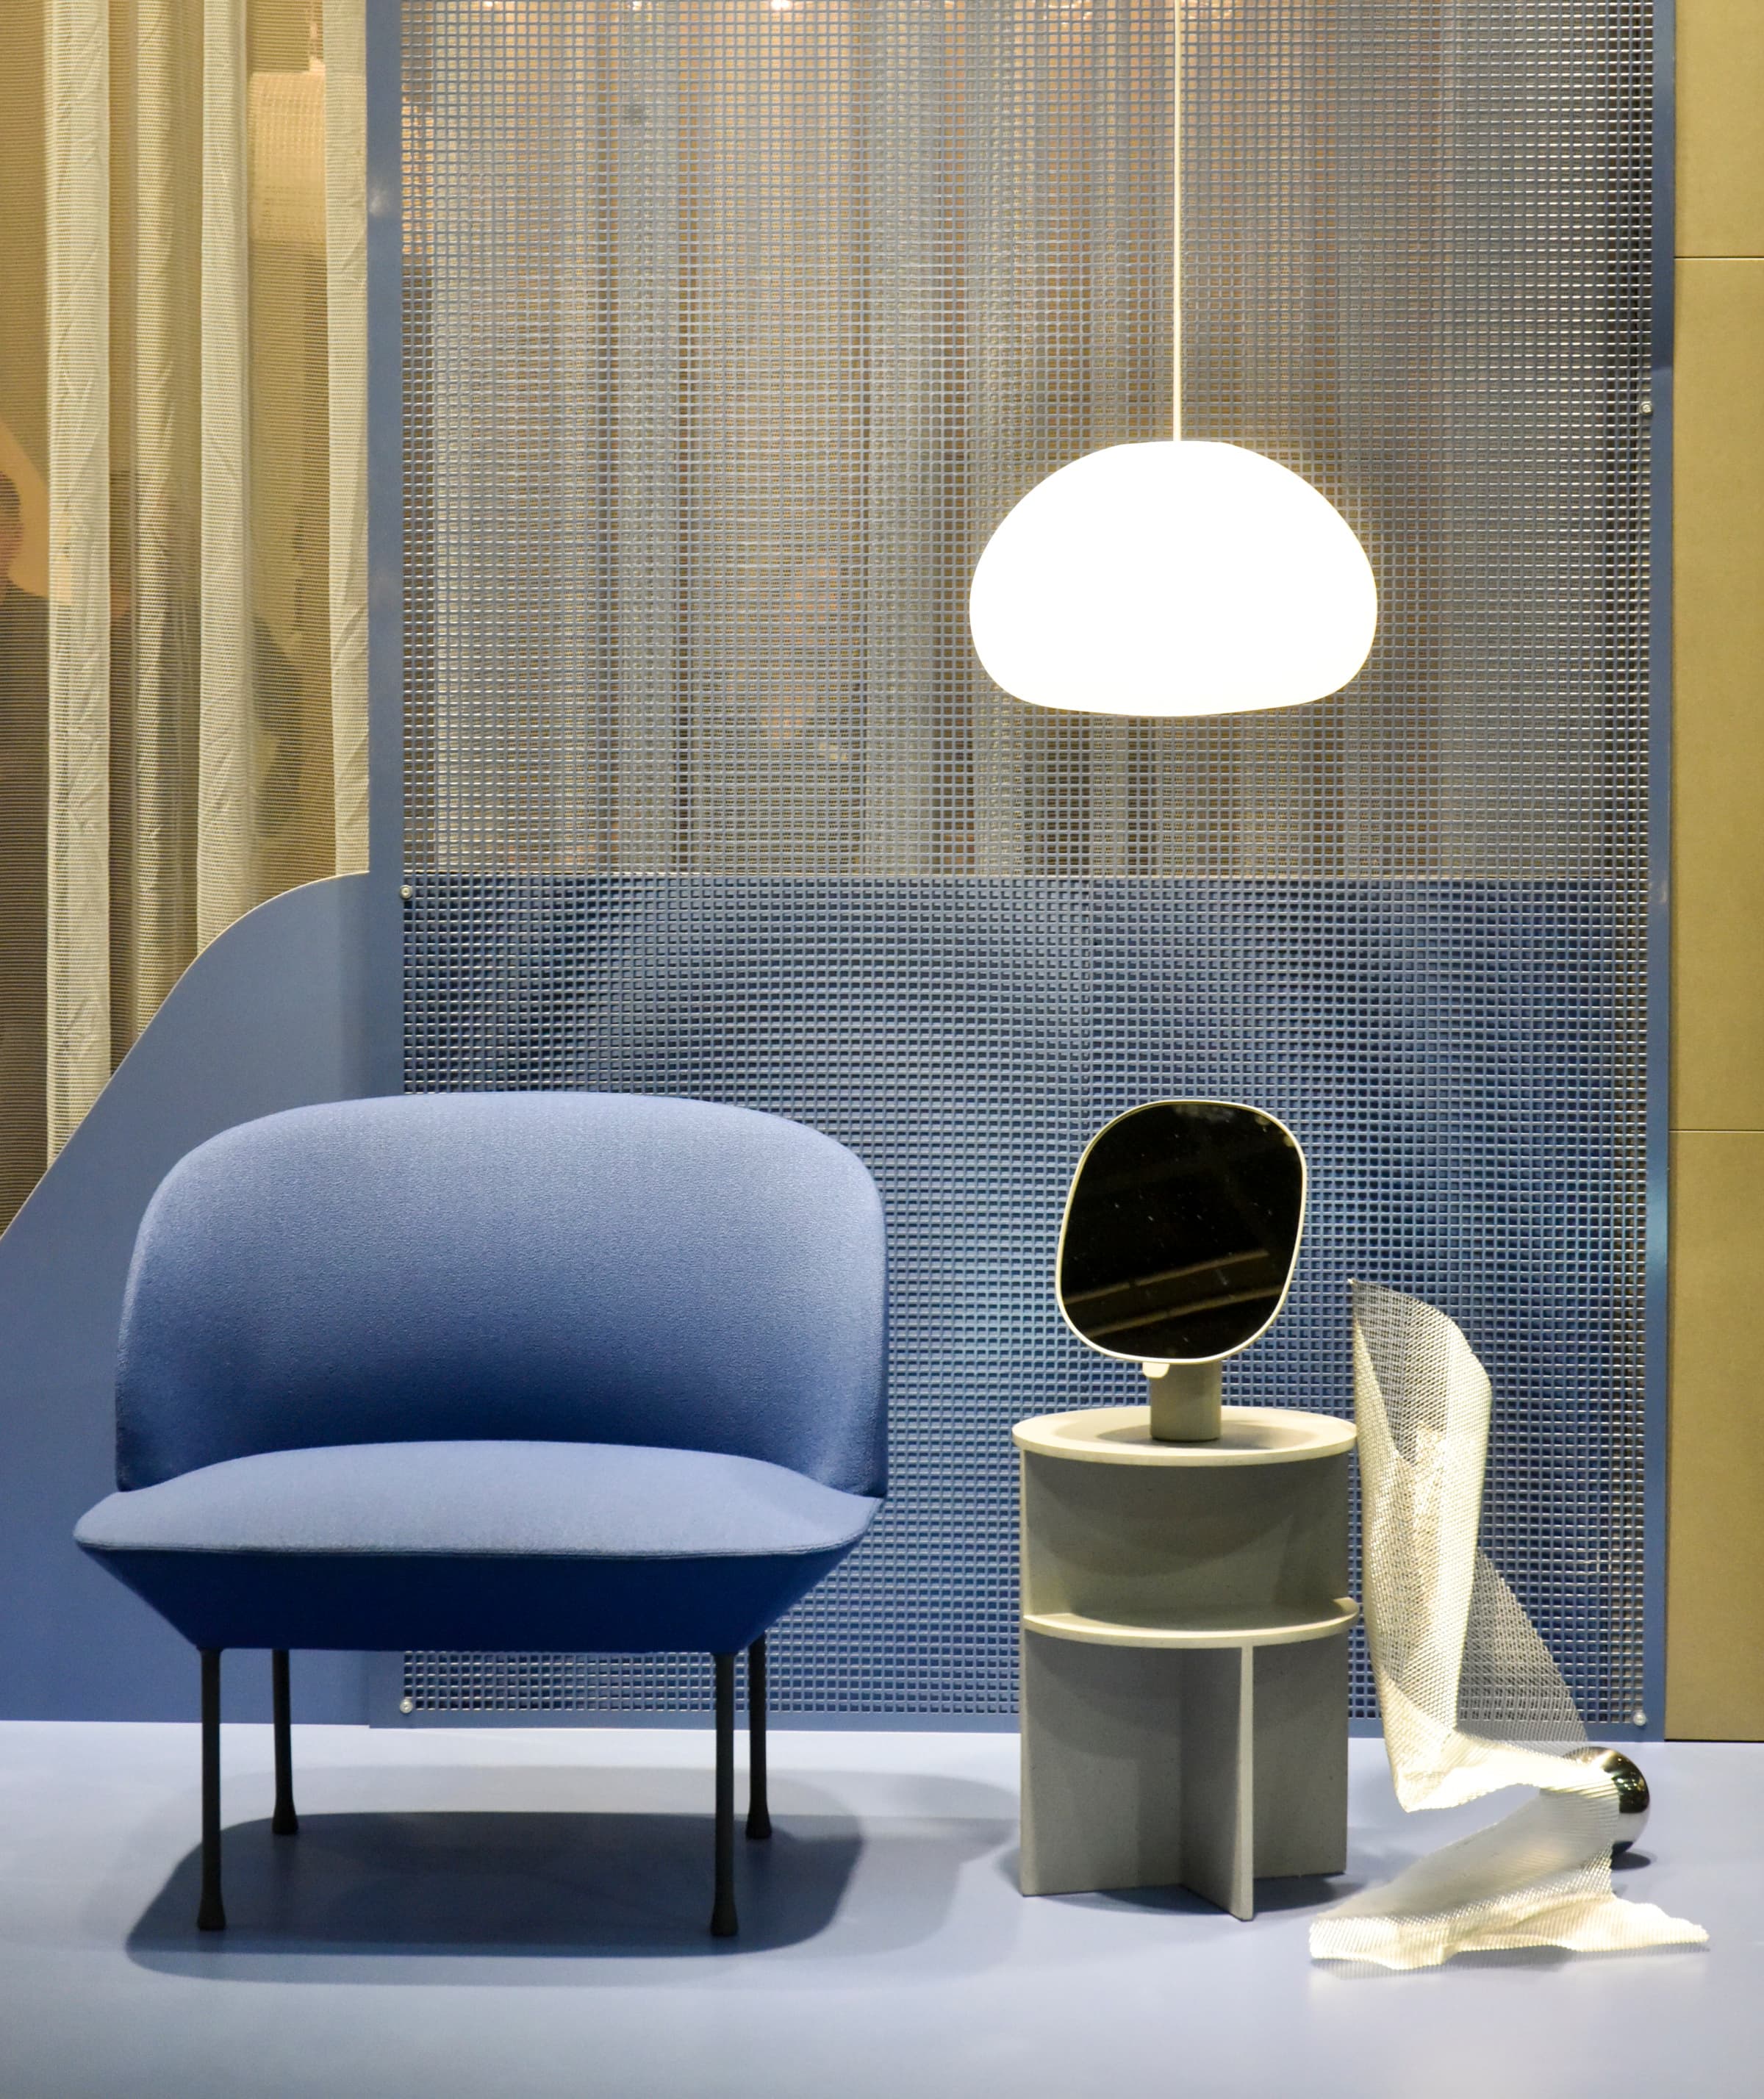 IMM Cologne - InsideOutContracts